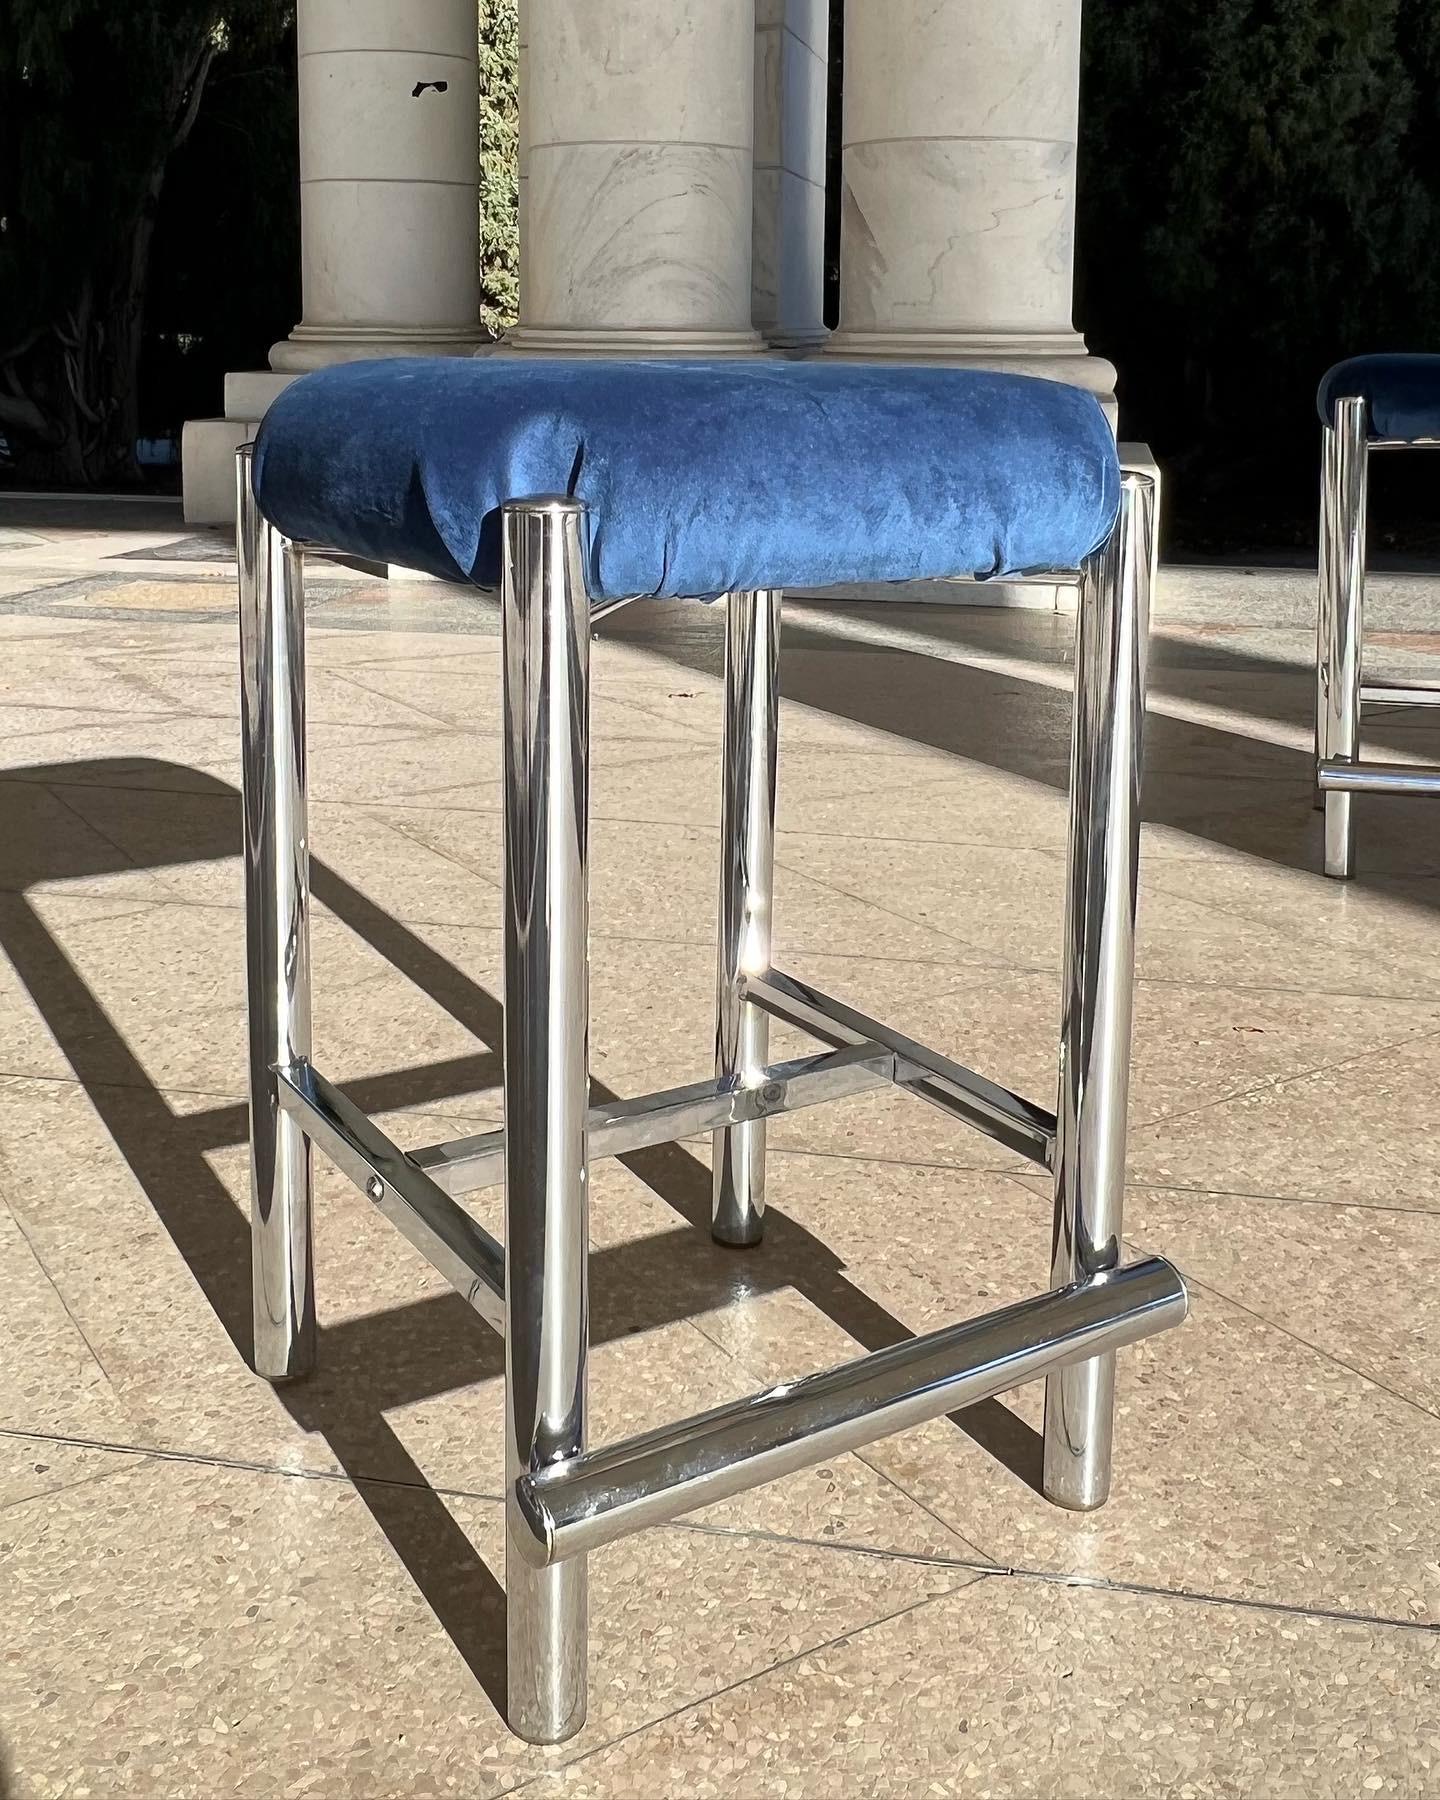 Vintage Cal-Style 1988 Chrome Bar Stools, Set of 4 In Excellent Condition For Sale In Denver, CO